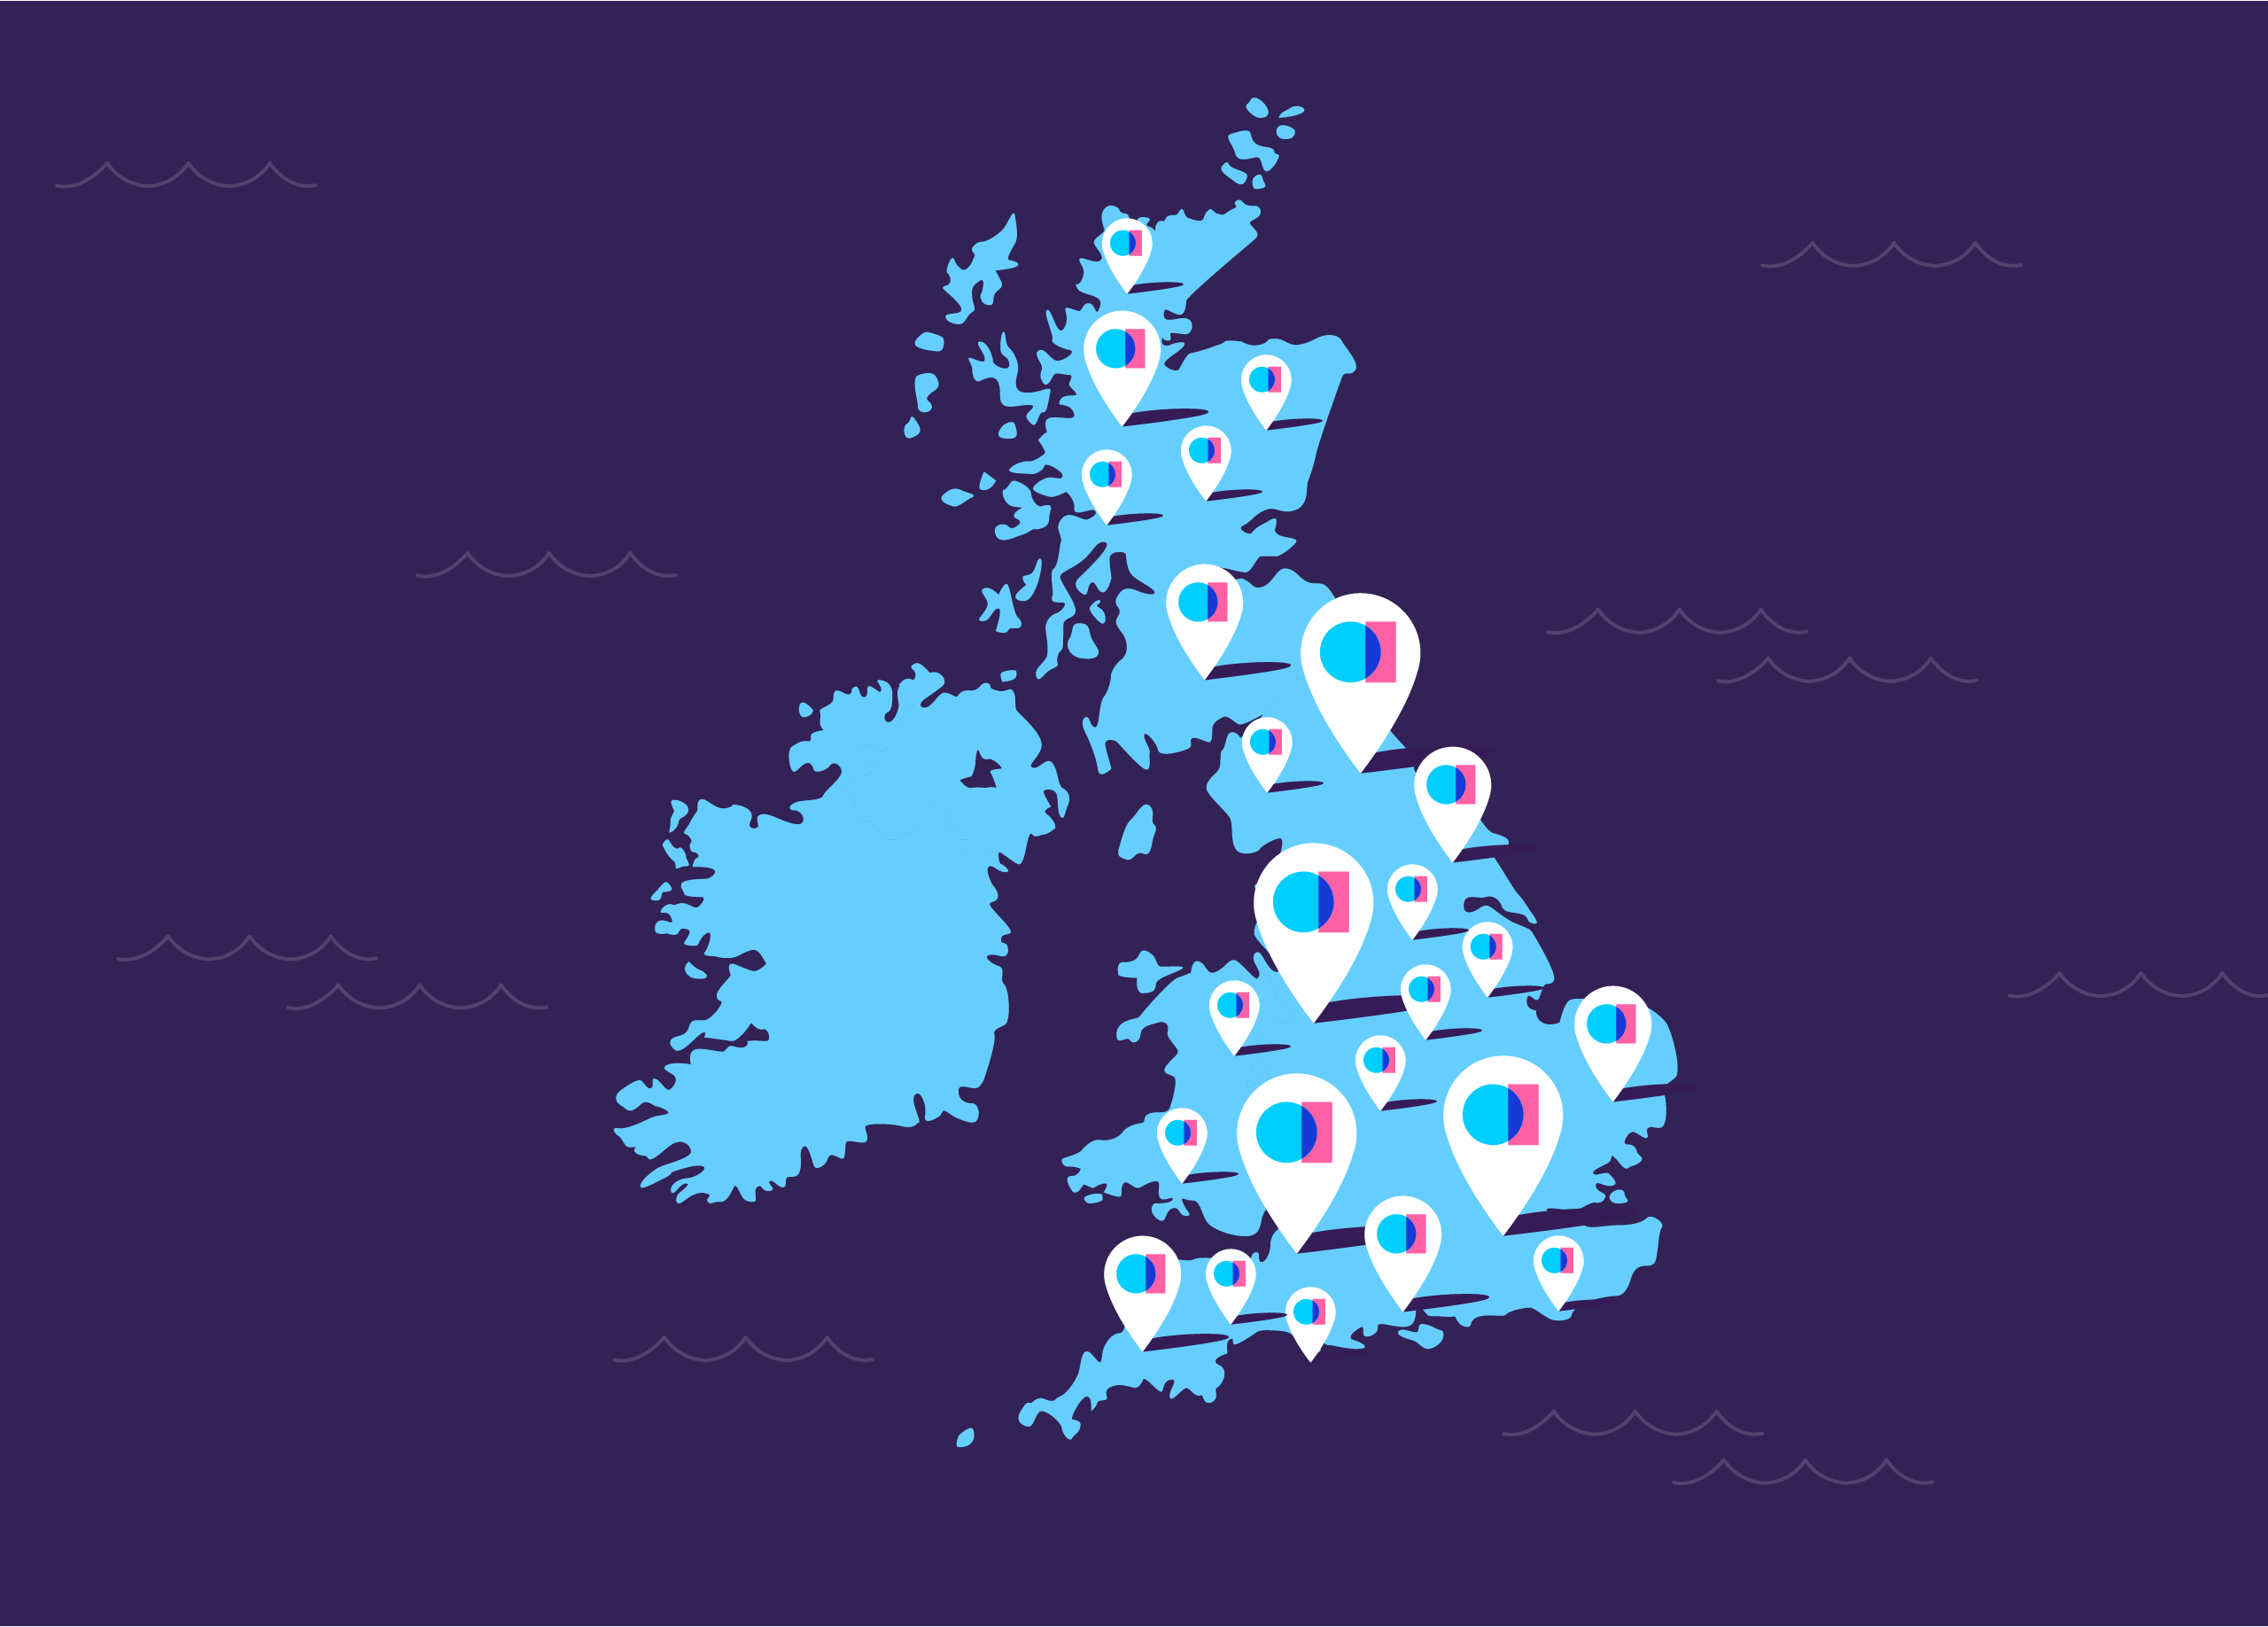 AppyWay has mapped 450 UK towns